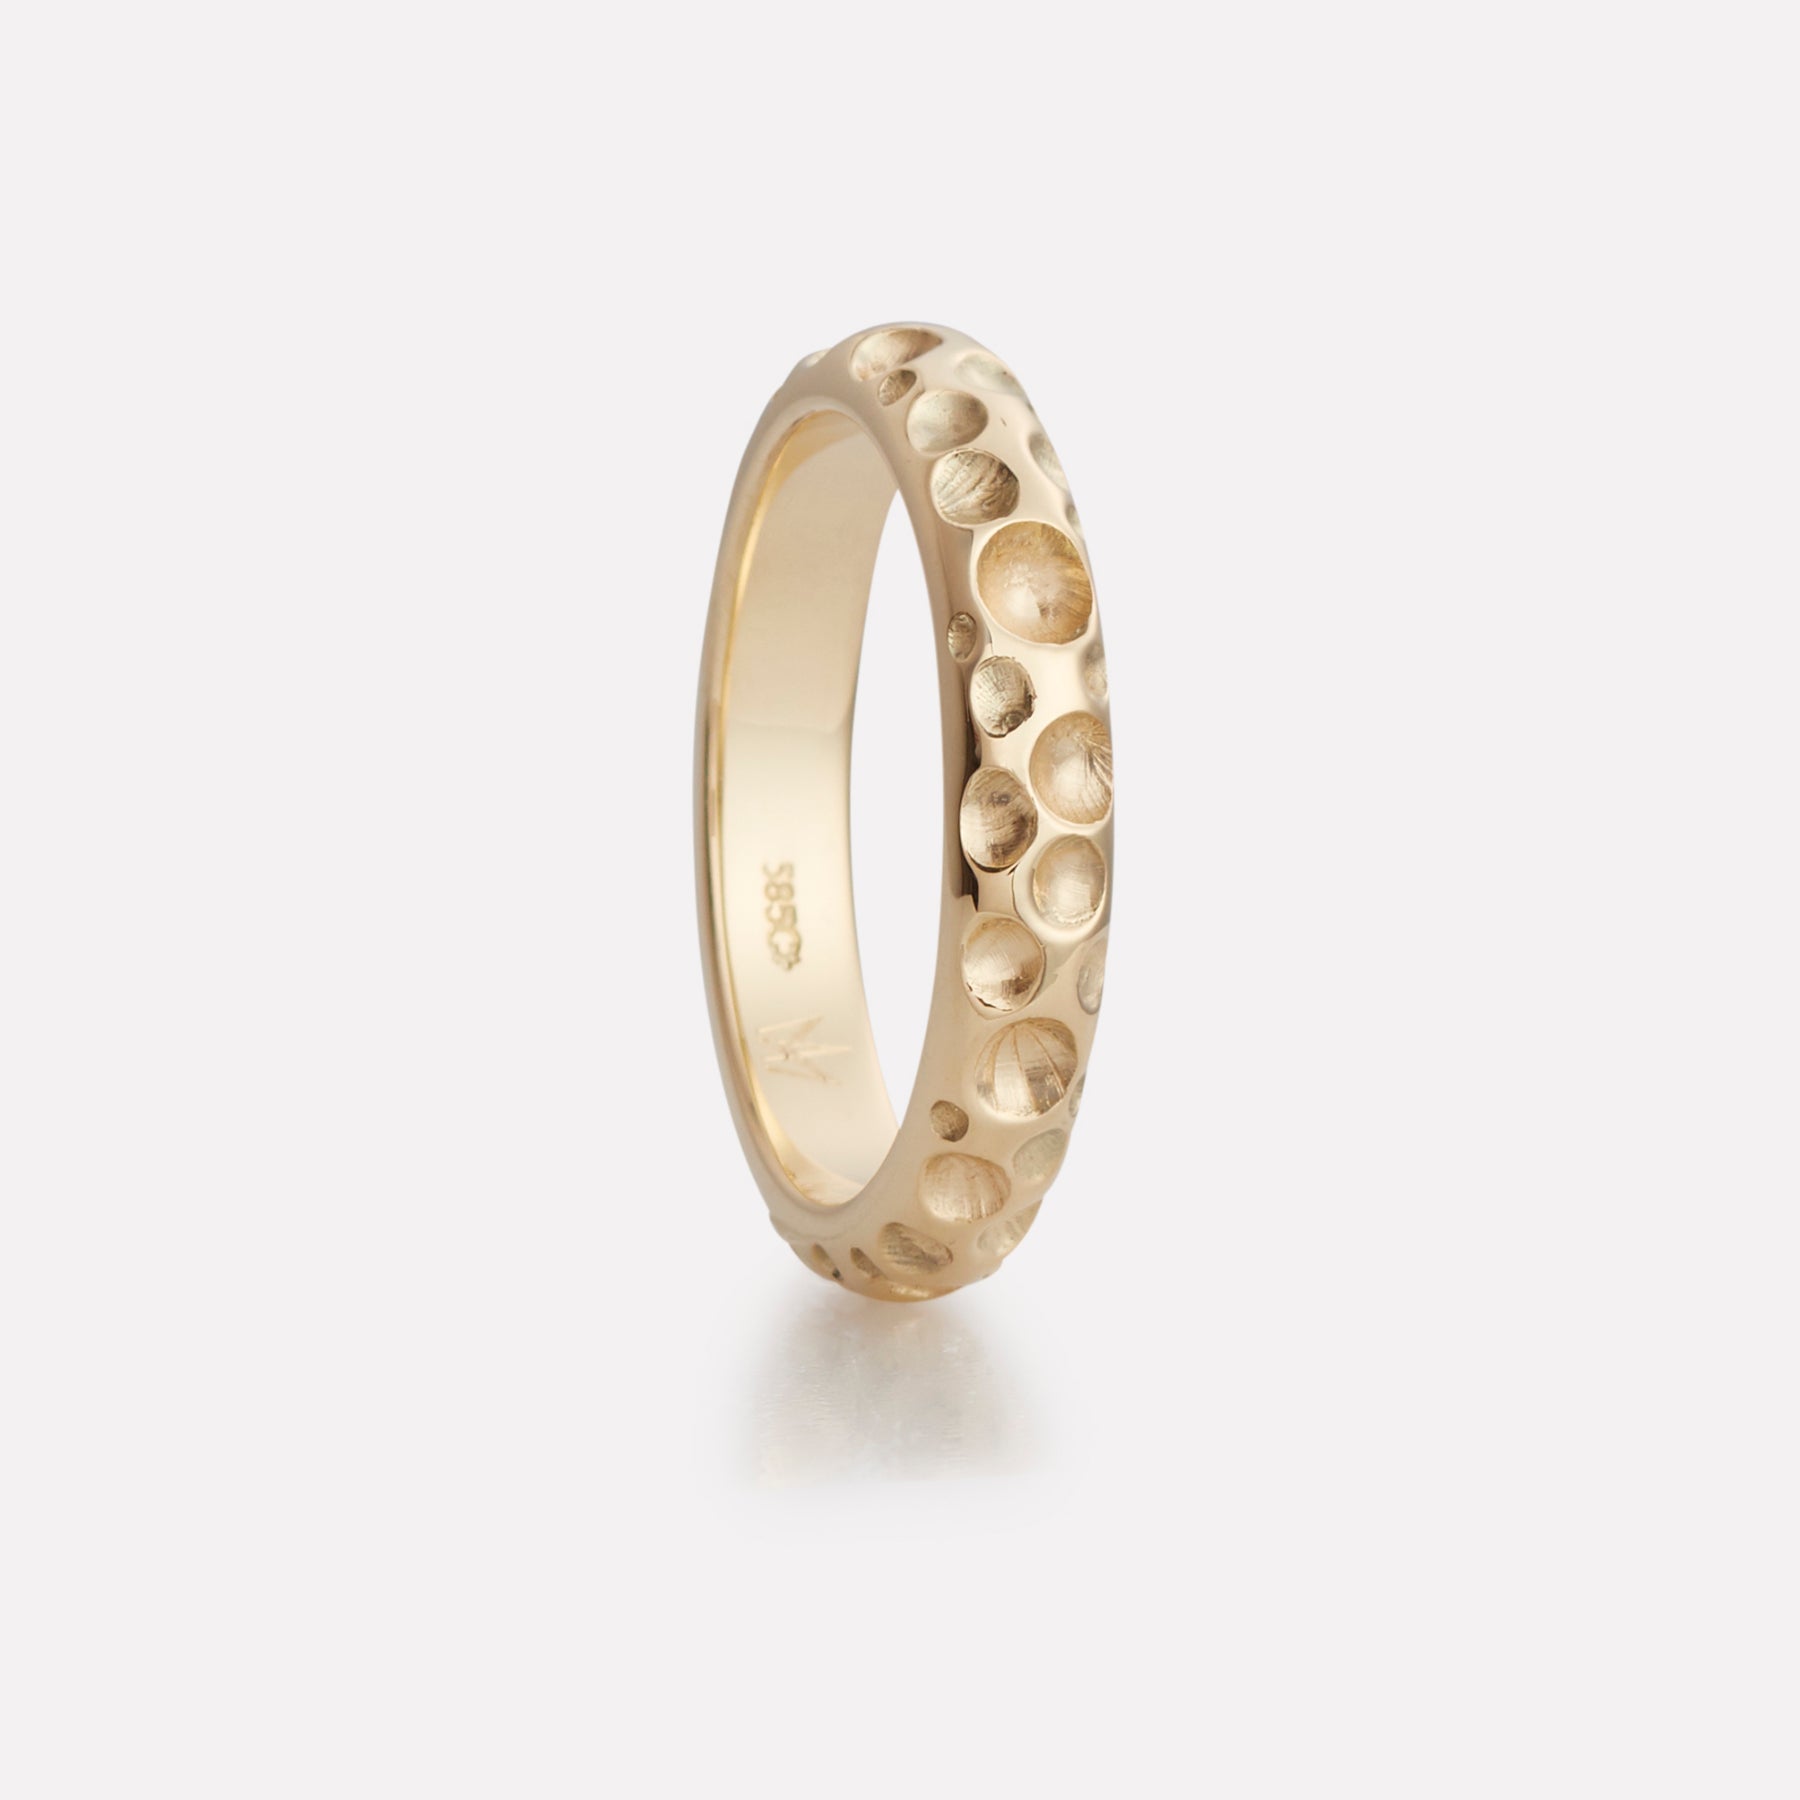 Bubble ring in yellow gold, gentleman